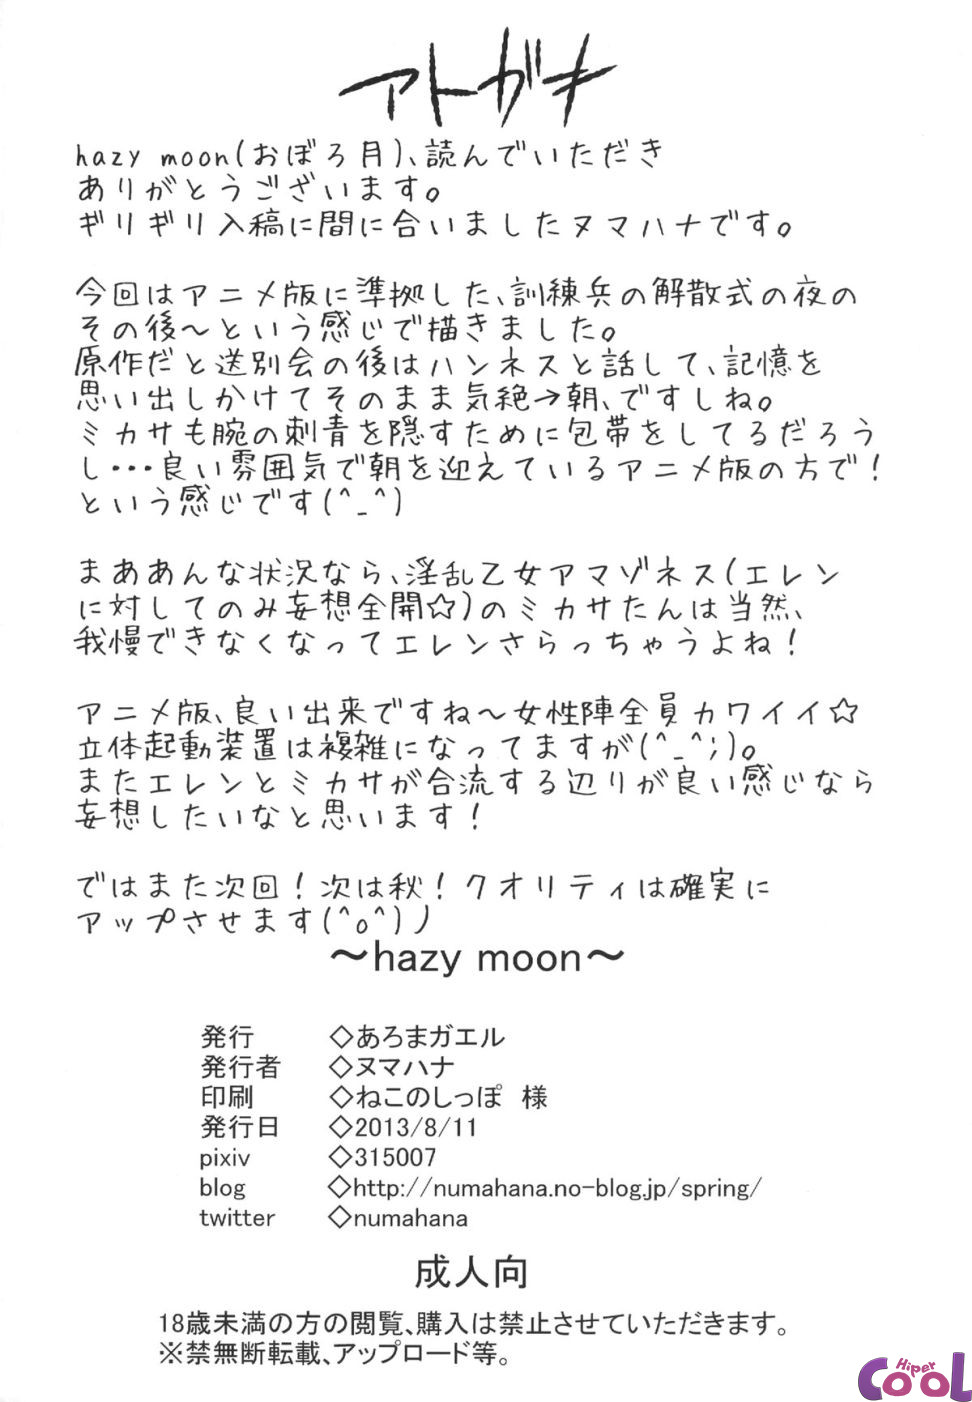 hazy-moon-chapter-01-page-22.jpg